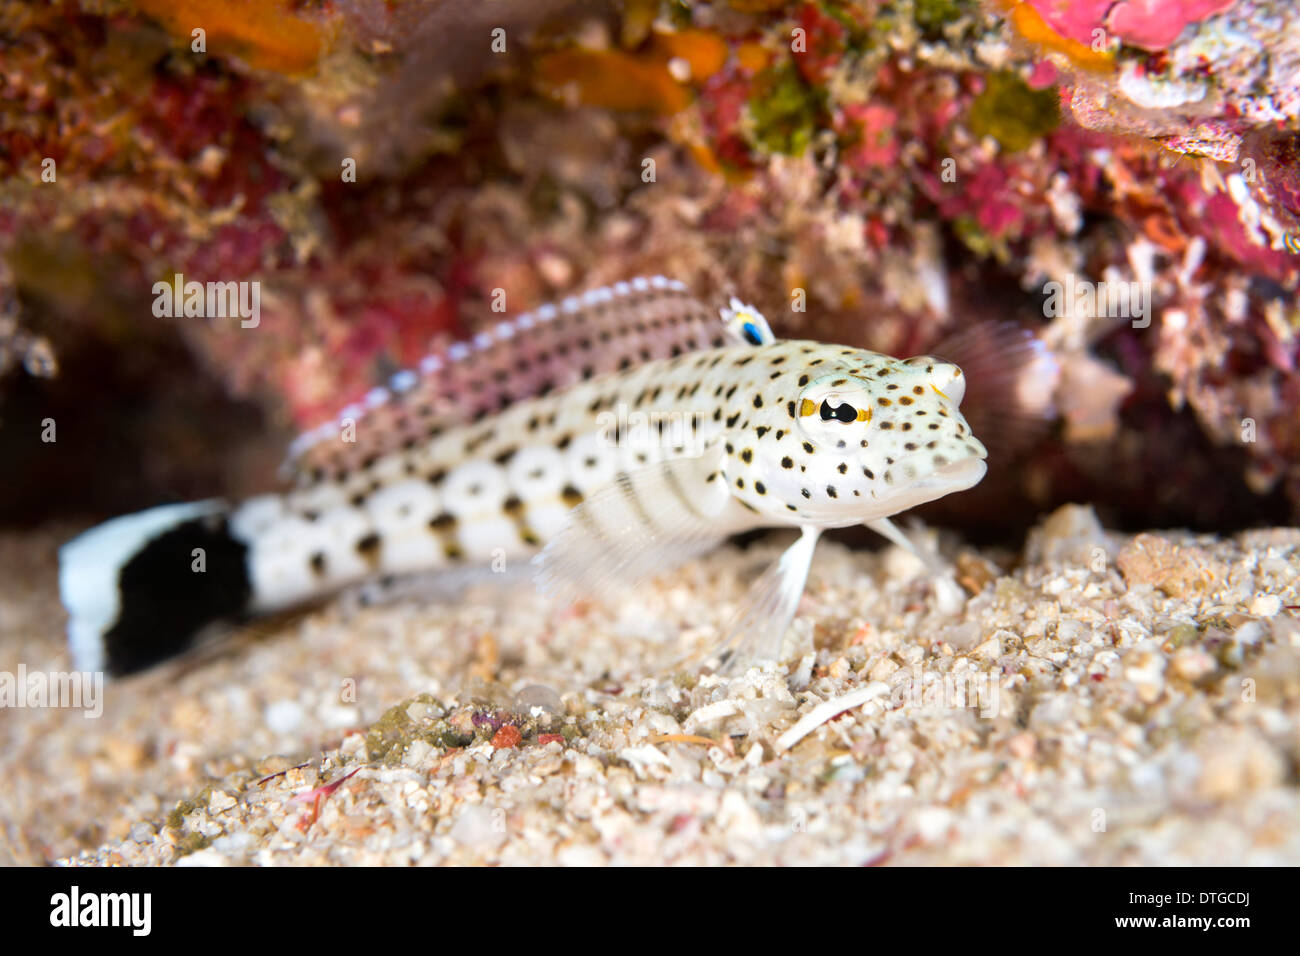 Image of a tropical sandperch resting on the bottom. Focus is on the eye. Stock Photo